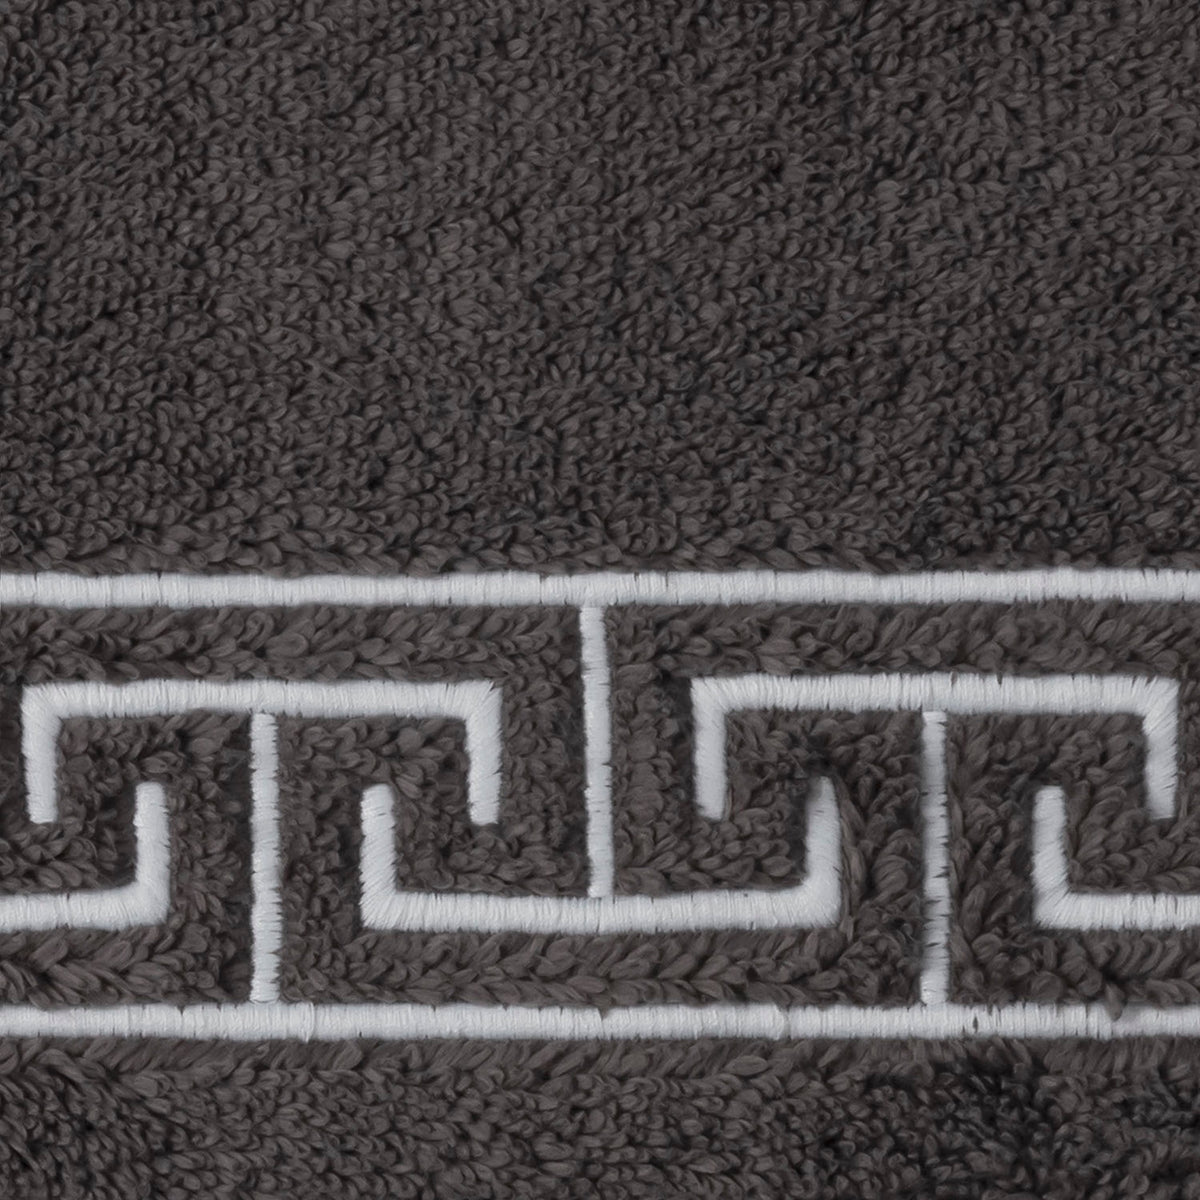 Swatch Sample of Matouk Adelphi Bath Rugs in Charcoal Color